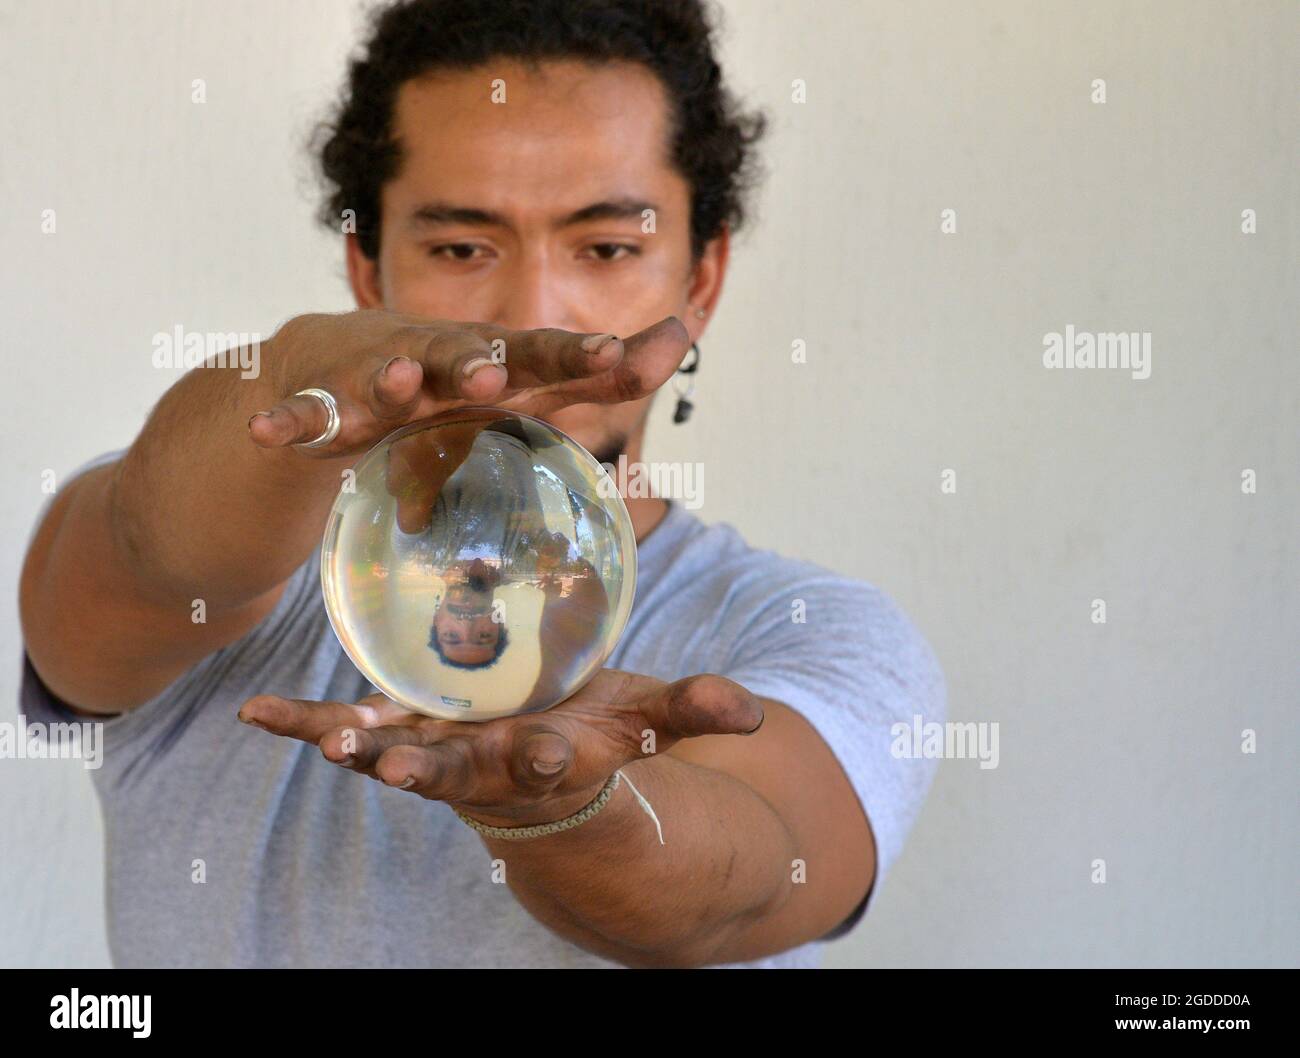 Handsome young man with dirty fingernails holds in his hands a crystal ball with his own vertically flipped mirror image and looks at the orb. Stock Photo